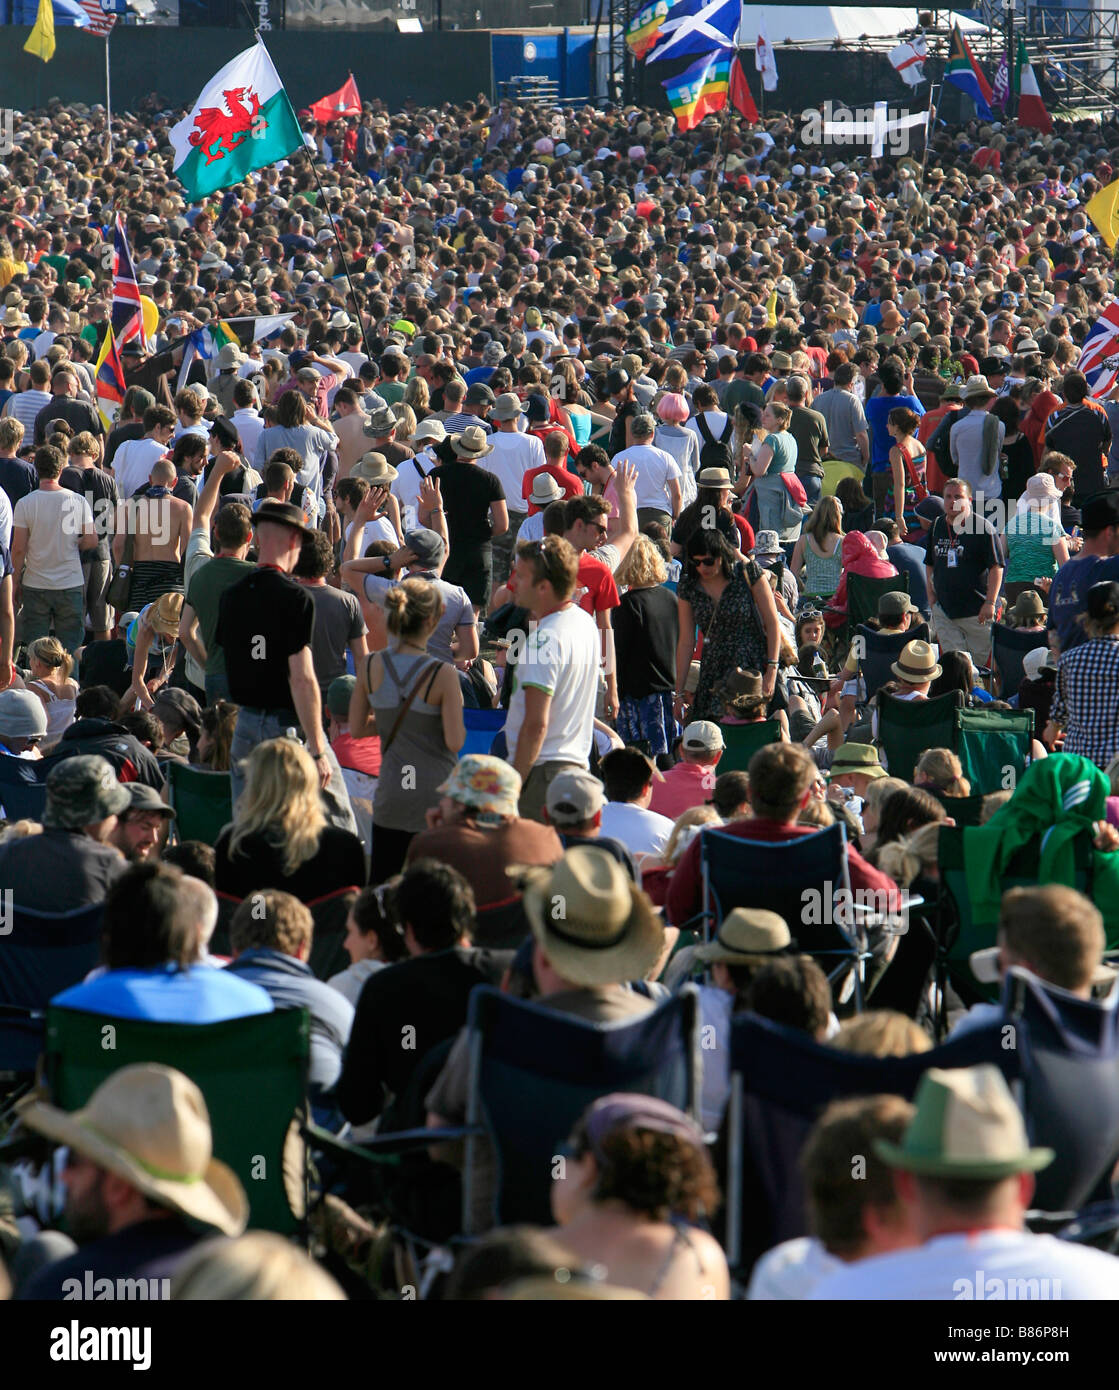 Crowds gather in front of the pyramid stage at the Glastonbury Festival in Pilton, Somerset. Stock Photo